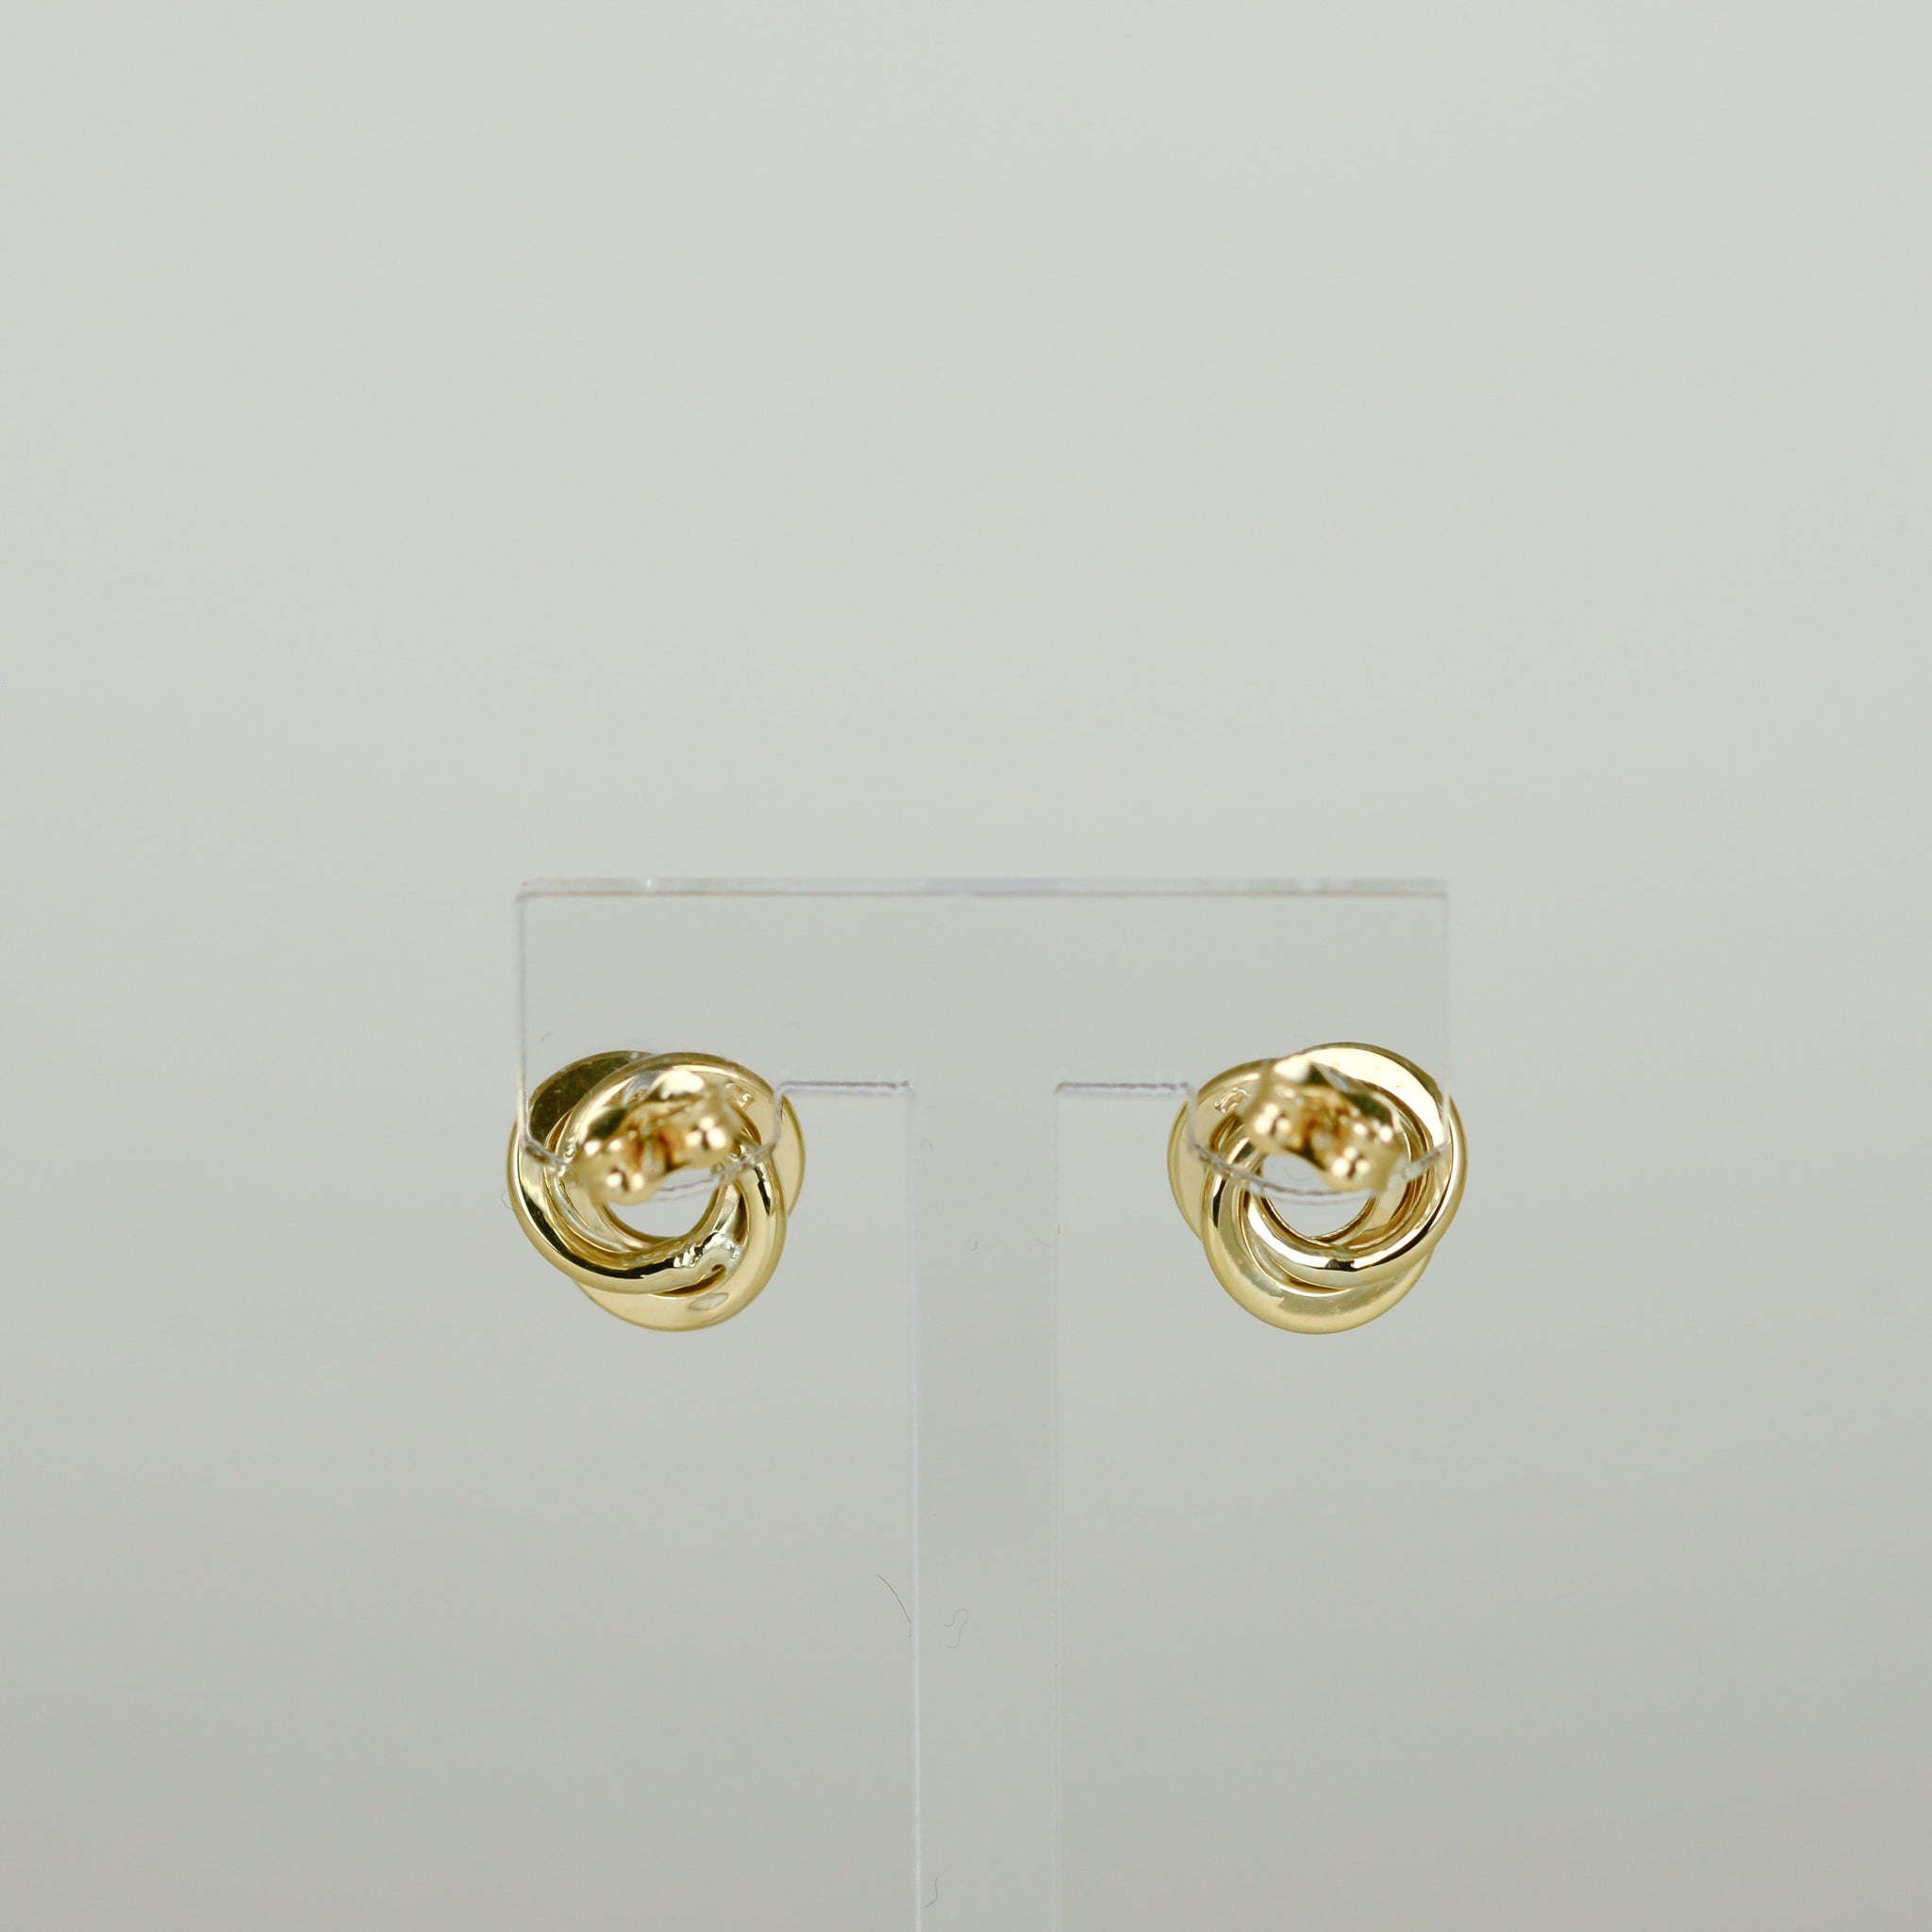 9ct Yellow Gold Flat Knot Stud Earrings